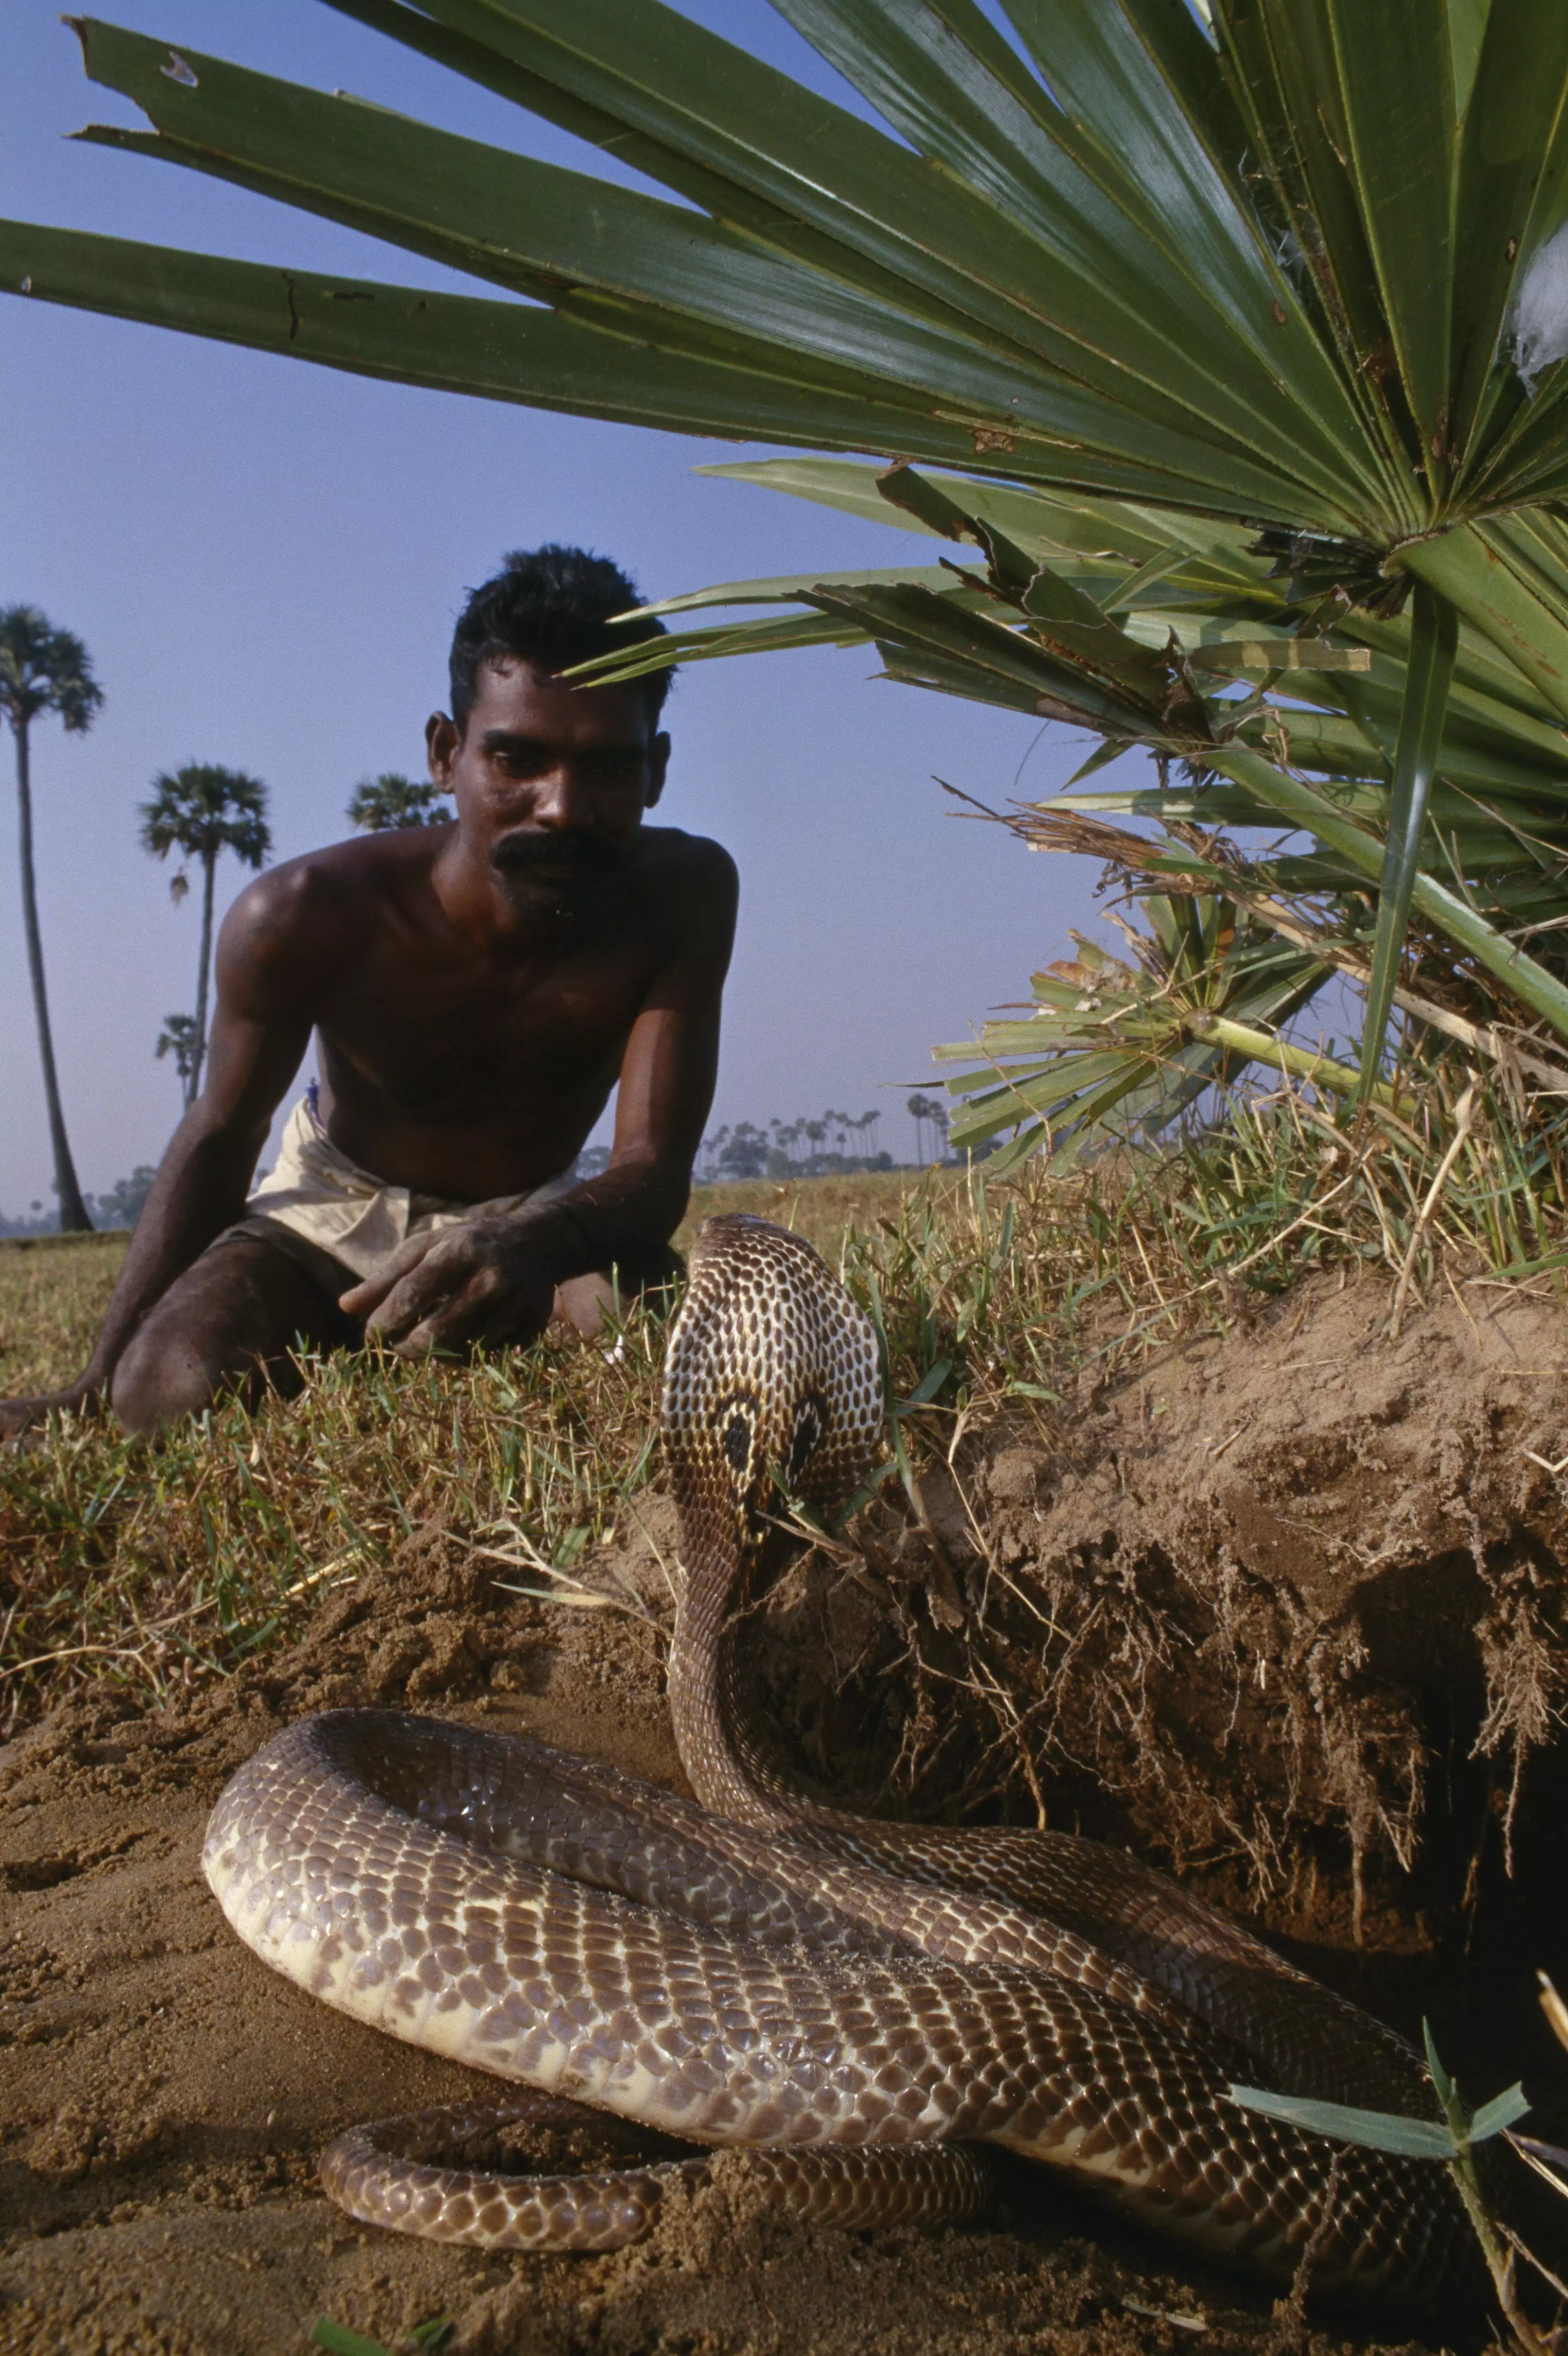 An man who makes a living from catching snakes for vemon extraction.